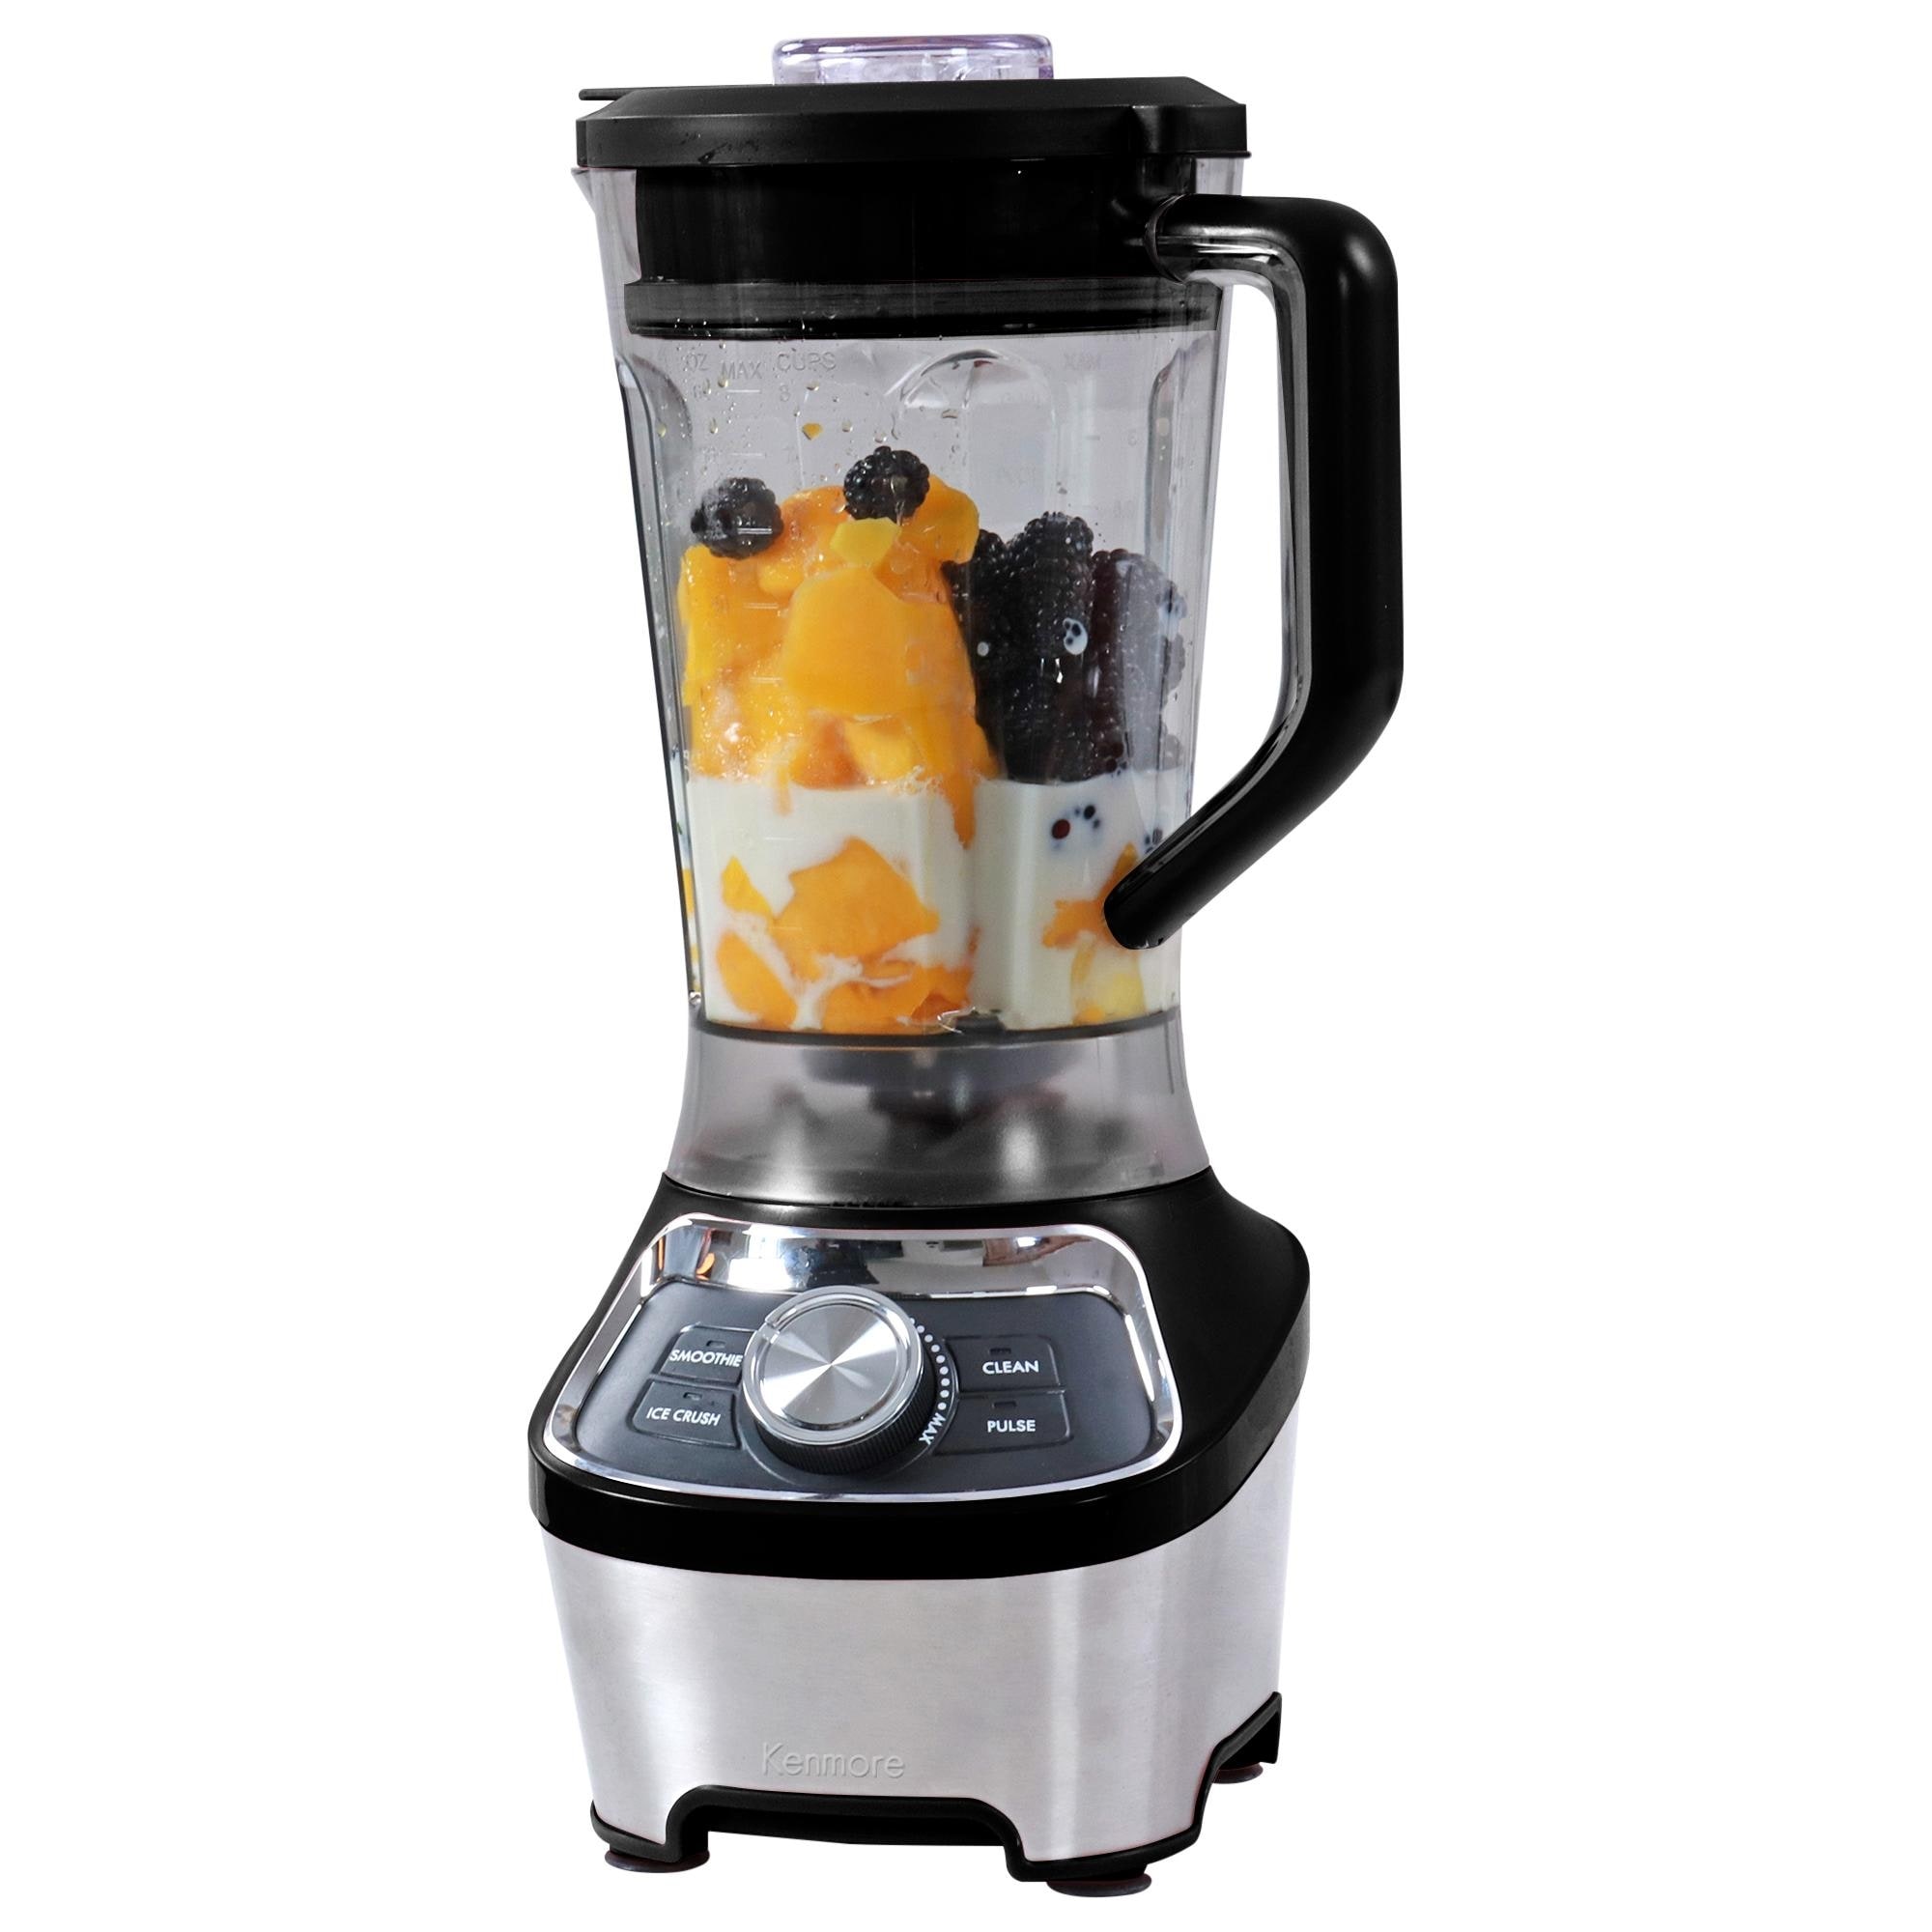 https://ak1.ostkcdn.com/images/products/is/images/direct/be82a90b7a16ba4b0e7504b34221354aebfcf96a/Kenmore-64-oz-Stand-Blender%2C-1200W%2C-Smoothie%2C-Ice-Crush%2C-Self-Clean-Modes%2C-Variable-Speed%2C-Black.jpg